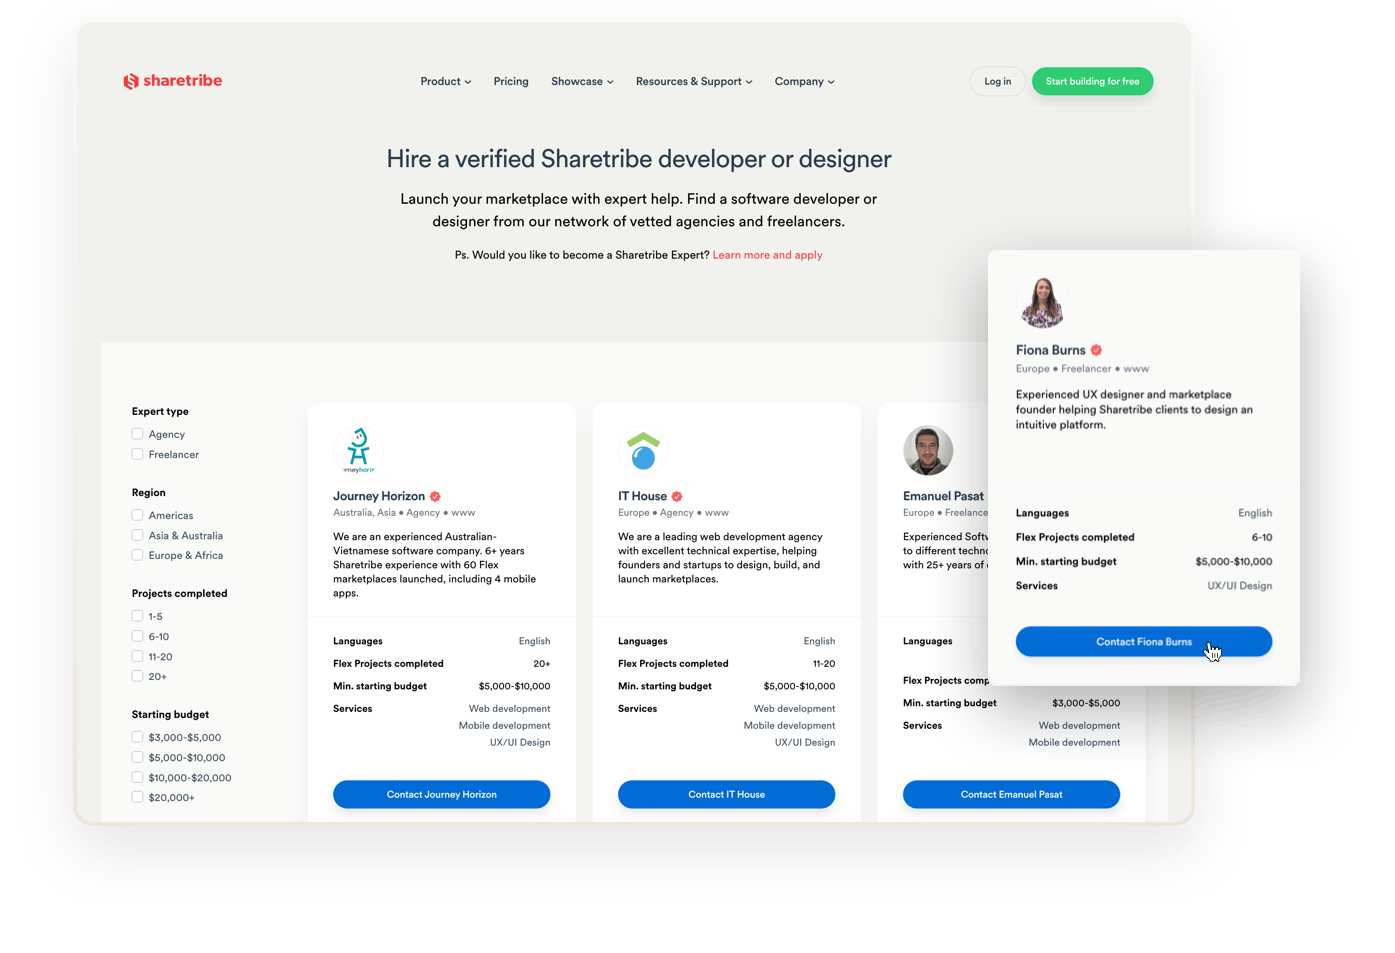 The Sharetribe Expert Network page. On the page, you can filter based on expert type, region, and starting budget among other options. You can also contact the experts.